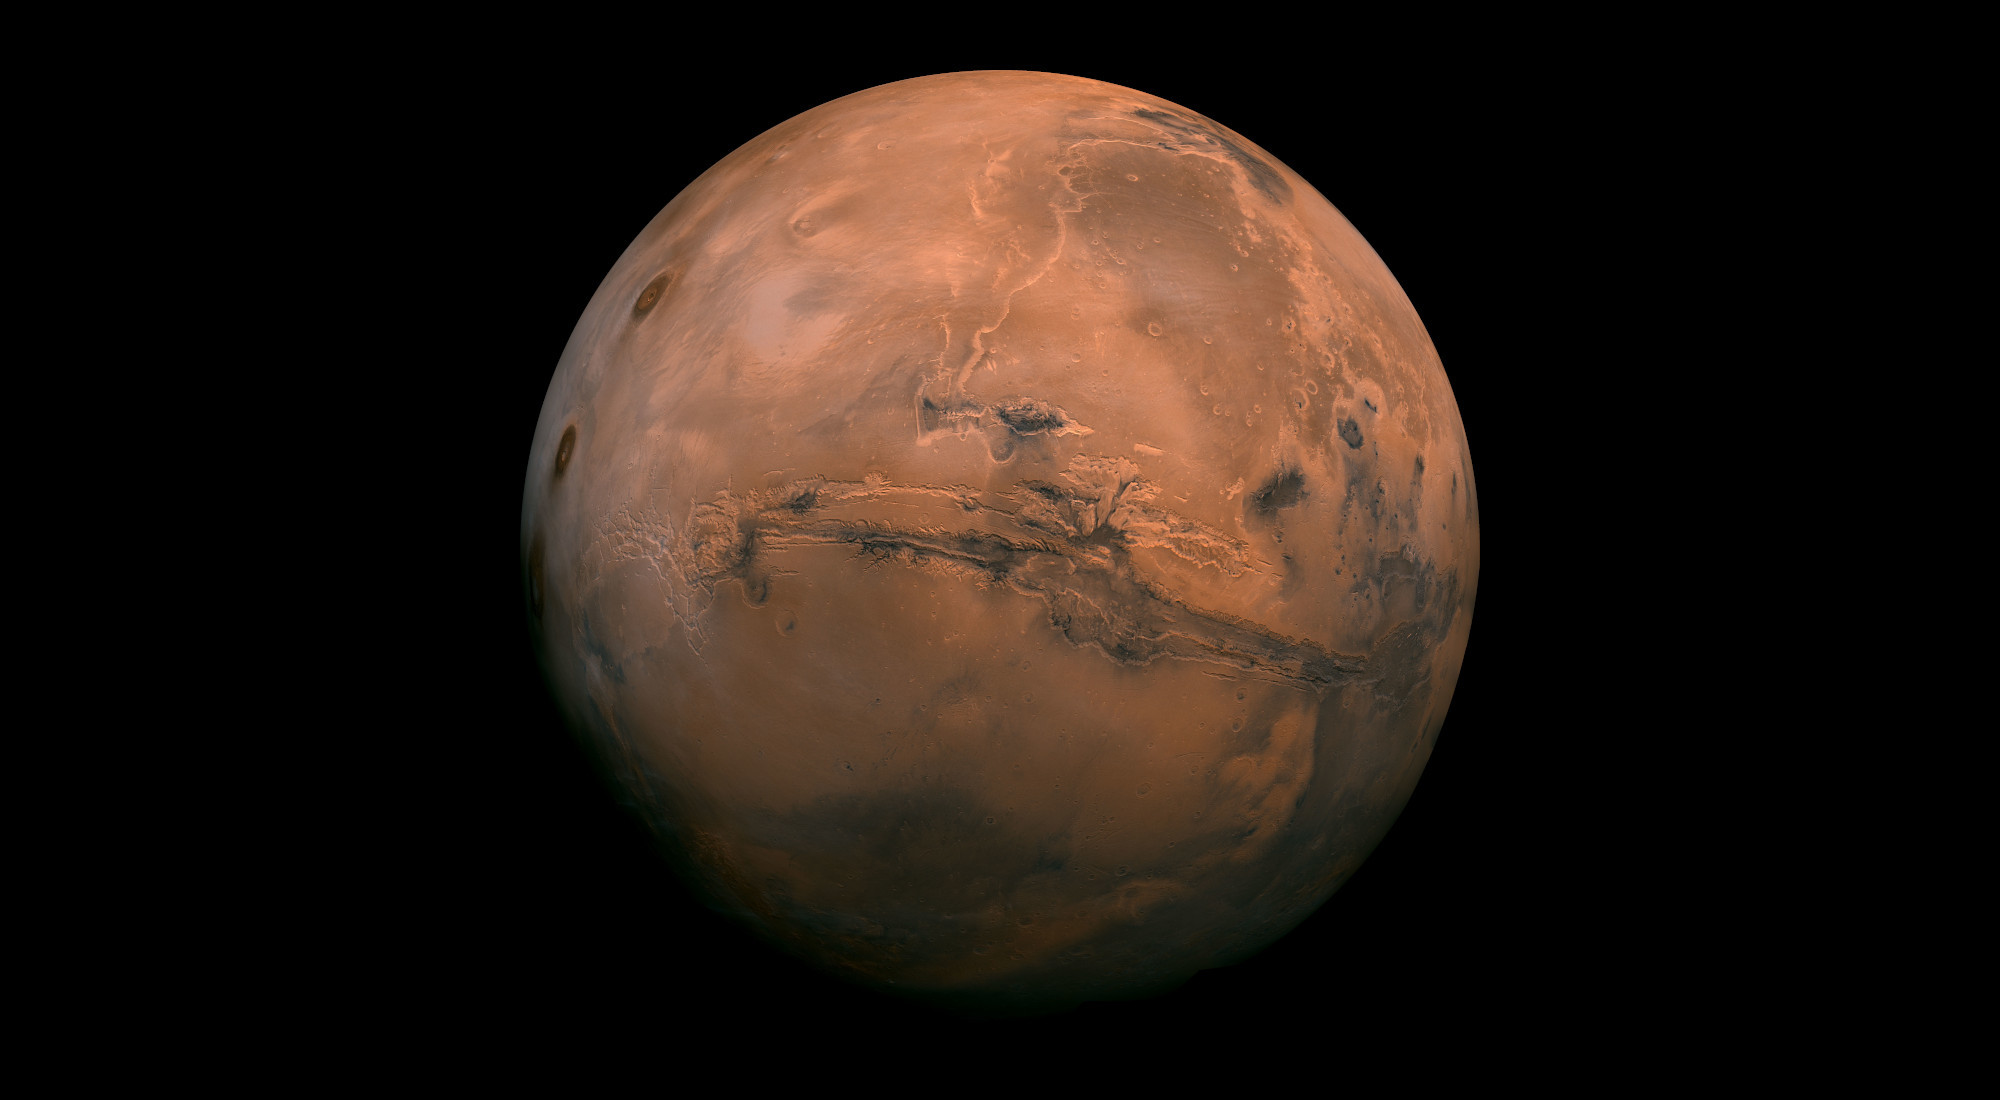 Mosaic of the Valles Marineris hemisphere of Mars projected into point perspective, a view similar to that which one would see from a spacecraft